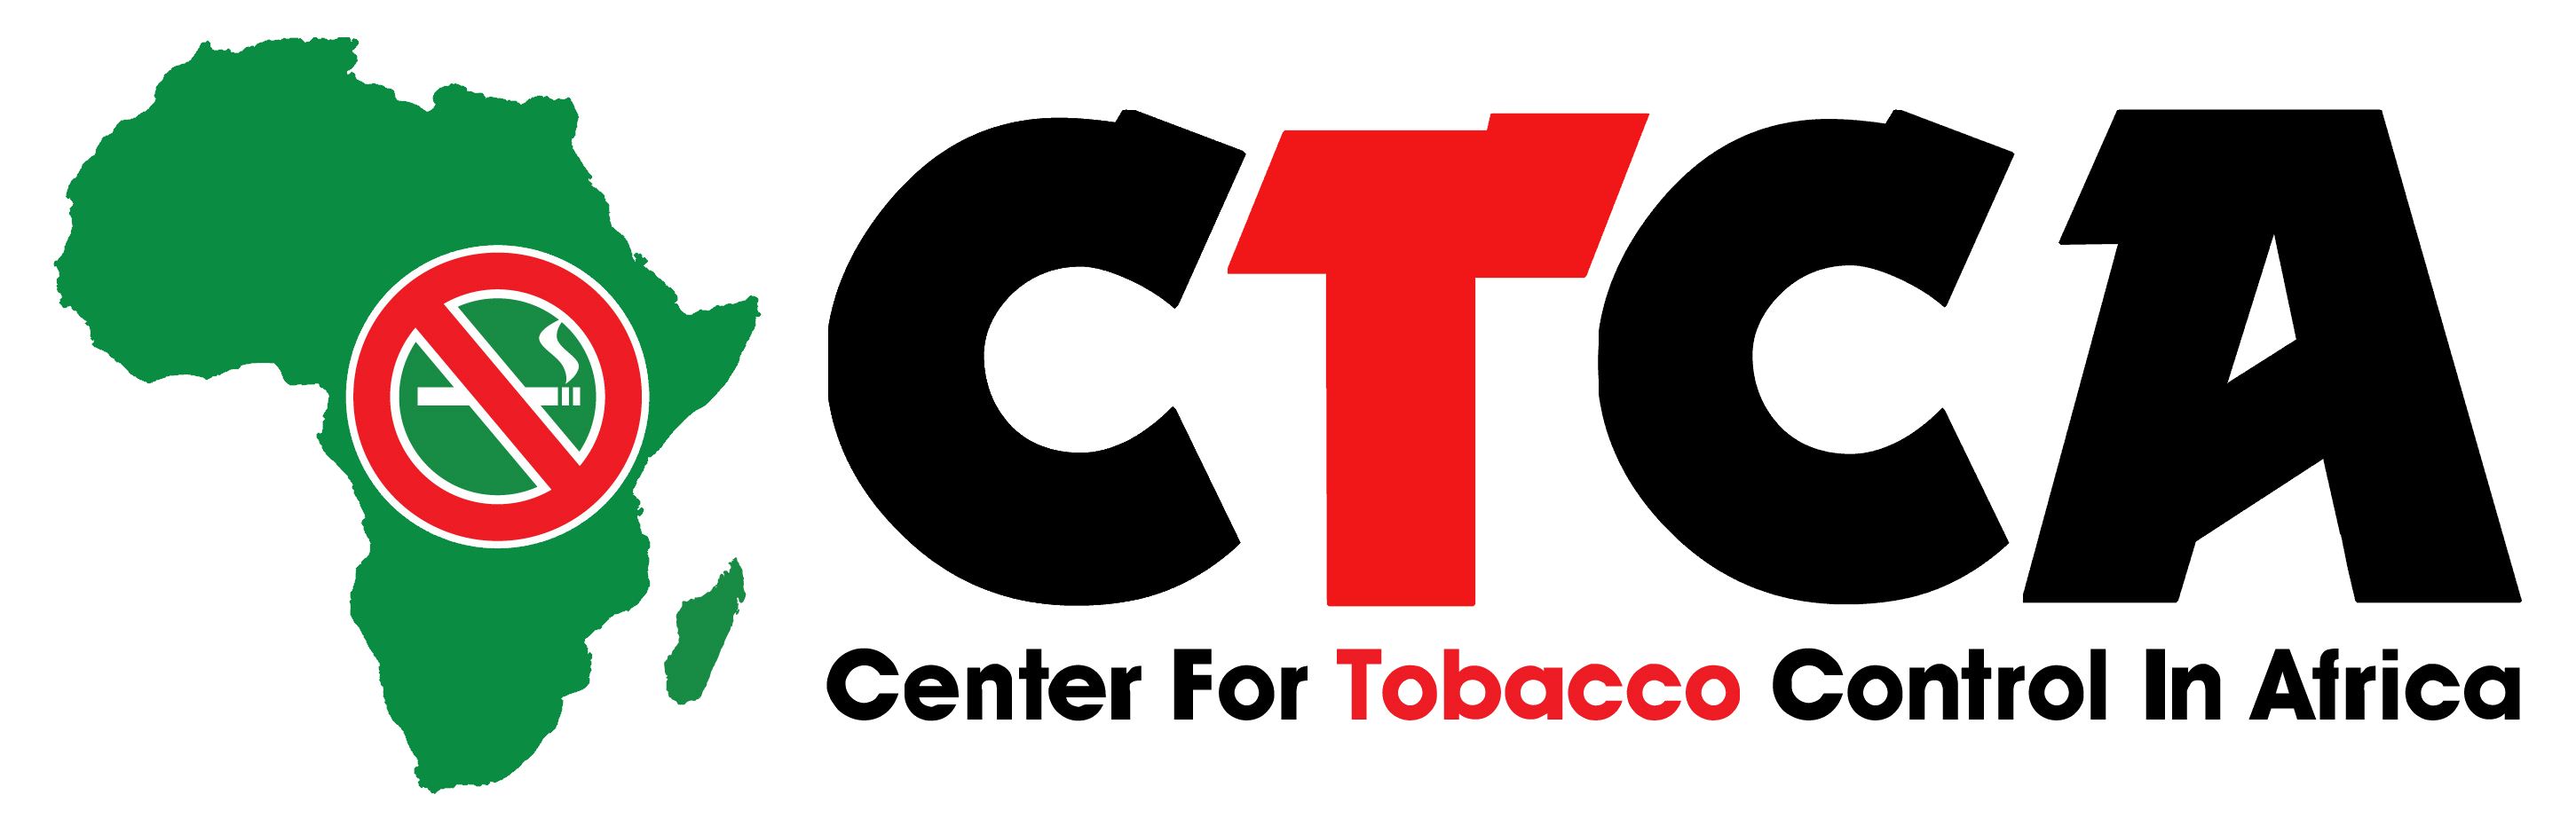 Centre for Tobacco Control in Africa